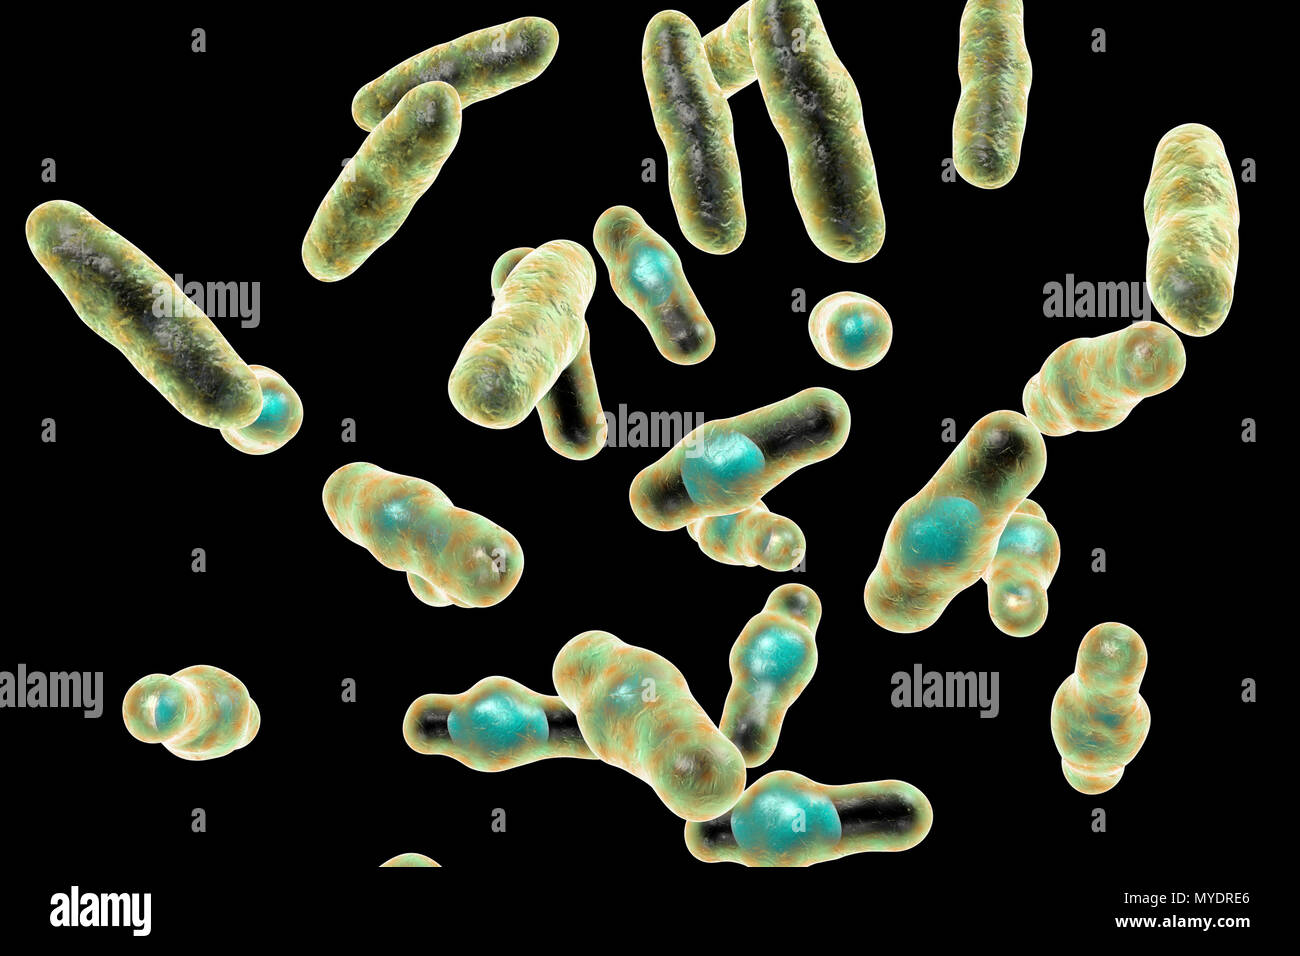 Computer illustration of Clostridium perfringens. These are Gram-positive, endospore-forming, rod-shaped bacteria. Vegetative and spore stages. This bacterium frequently occurs in the intestines of humans and many domestic and feral animals. Food poisoning occurs when foods such as beef, gravy and poultry are cooled and/or reheated improperly and large numbers of vegetative cells are ingested. Toxin production in the digestive tract is associated with sporulation. C. perfringens is also a major pathogen of wound infections, producing a variety of toxins that act both locally and systemically. Stock Photo